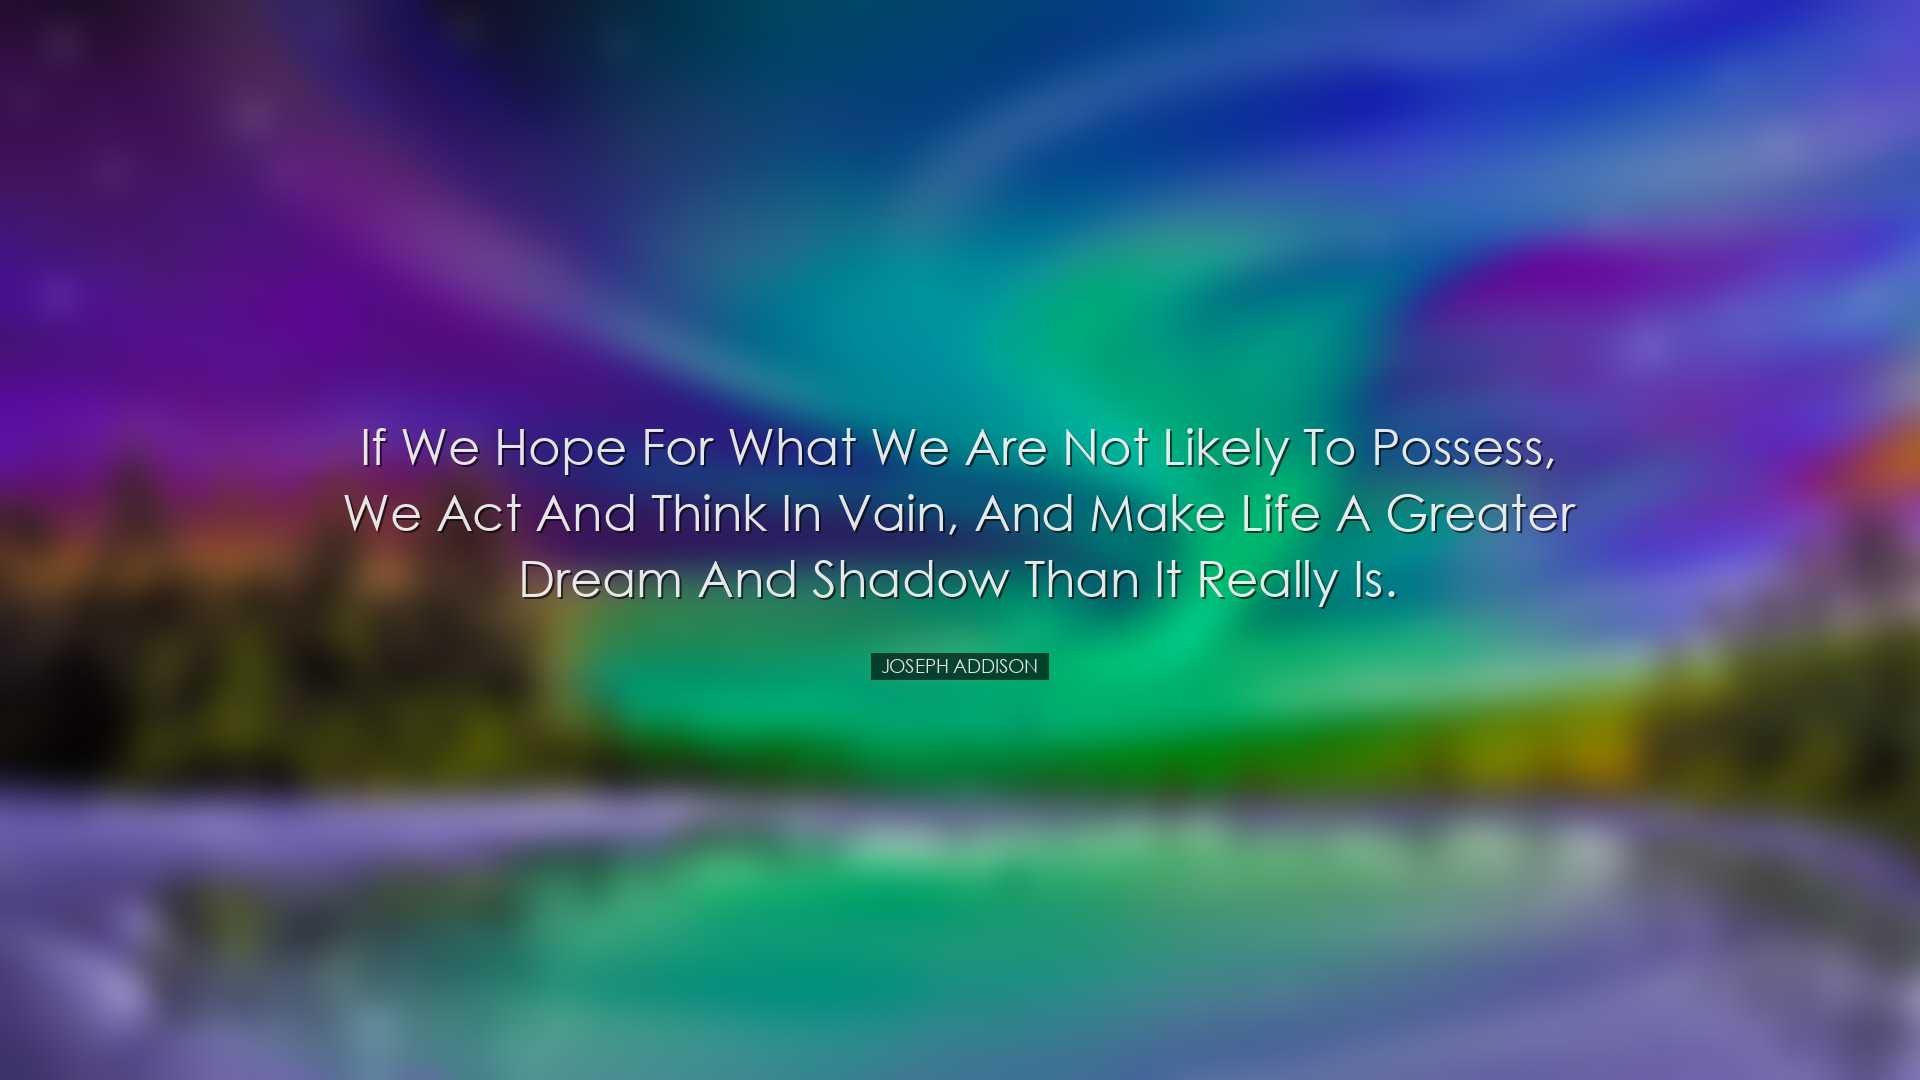 If we hope for what we are not likely to possess, we act and think